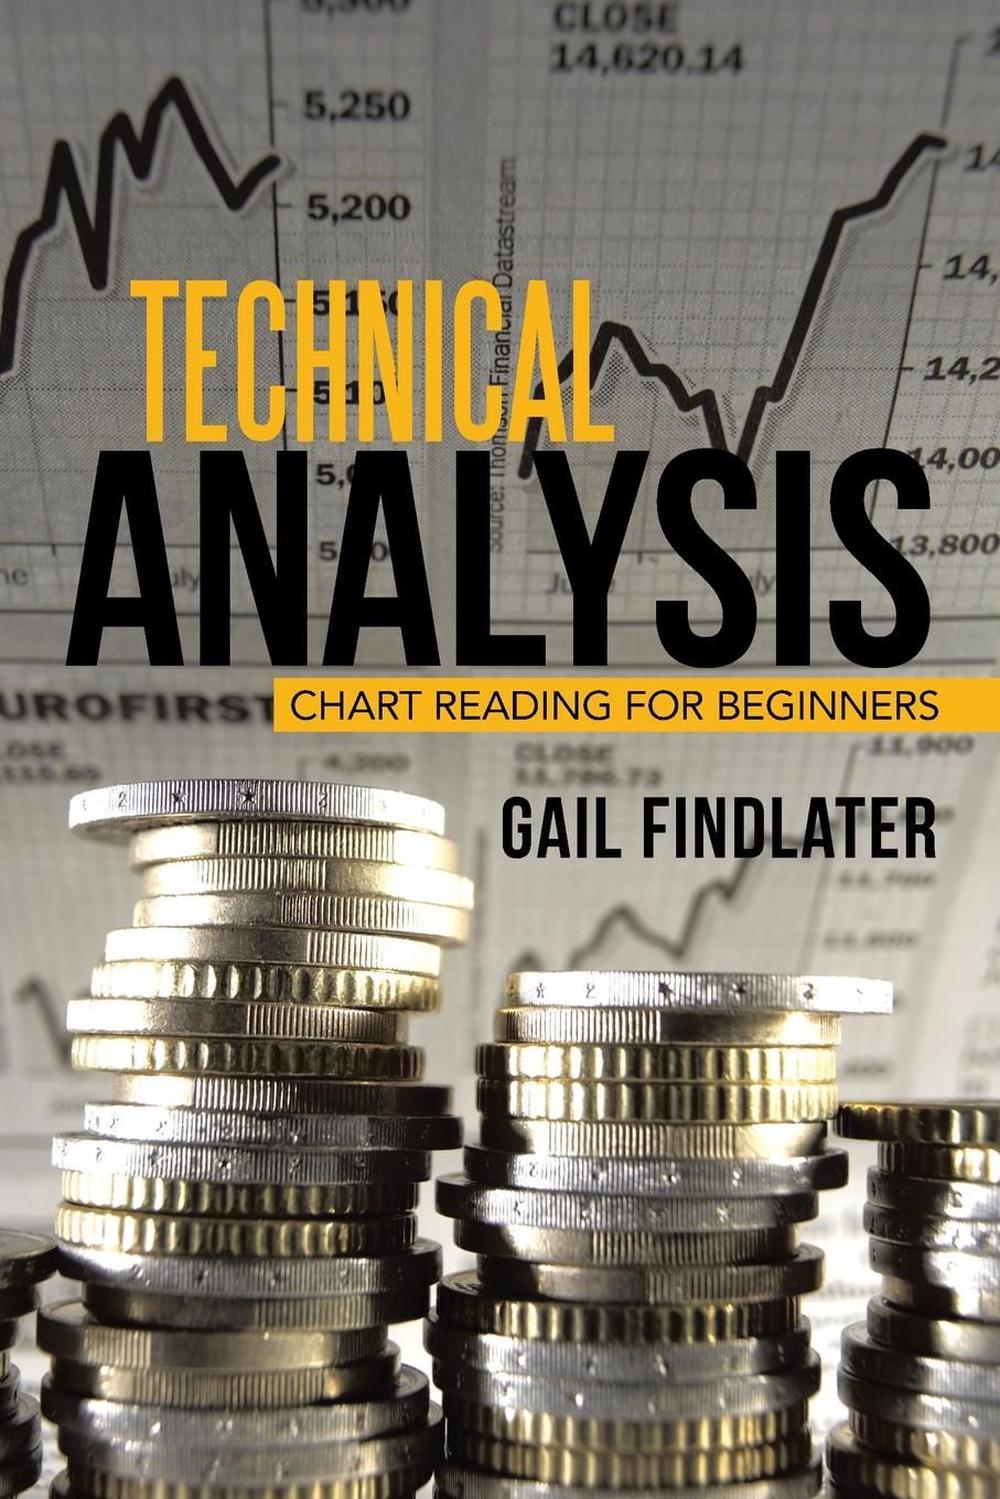 Details about Technical Analysis: Chart Reading for Beginners by Gail  Findlater (English) Pape